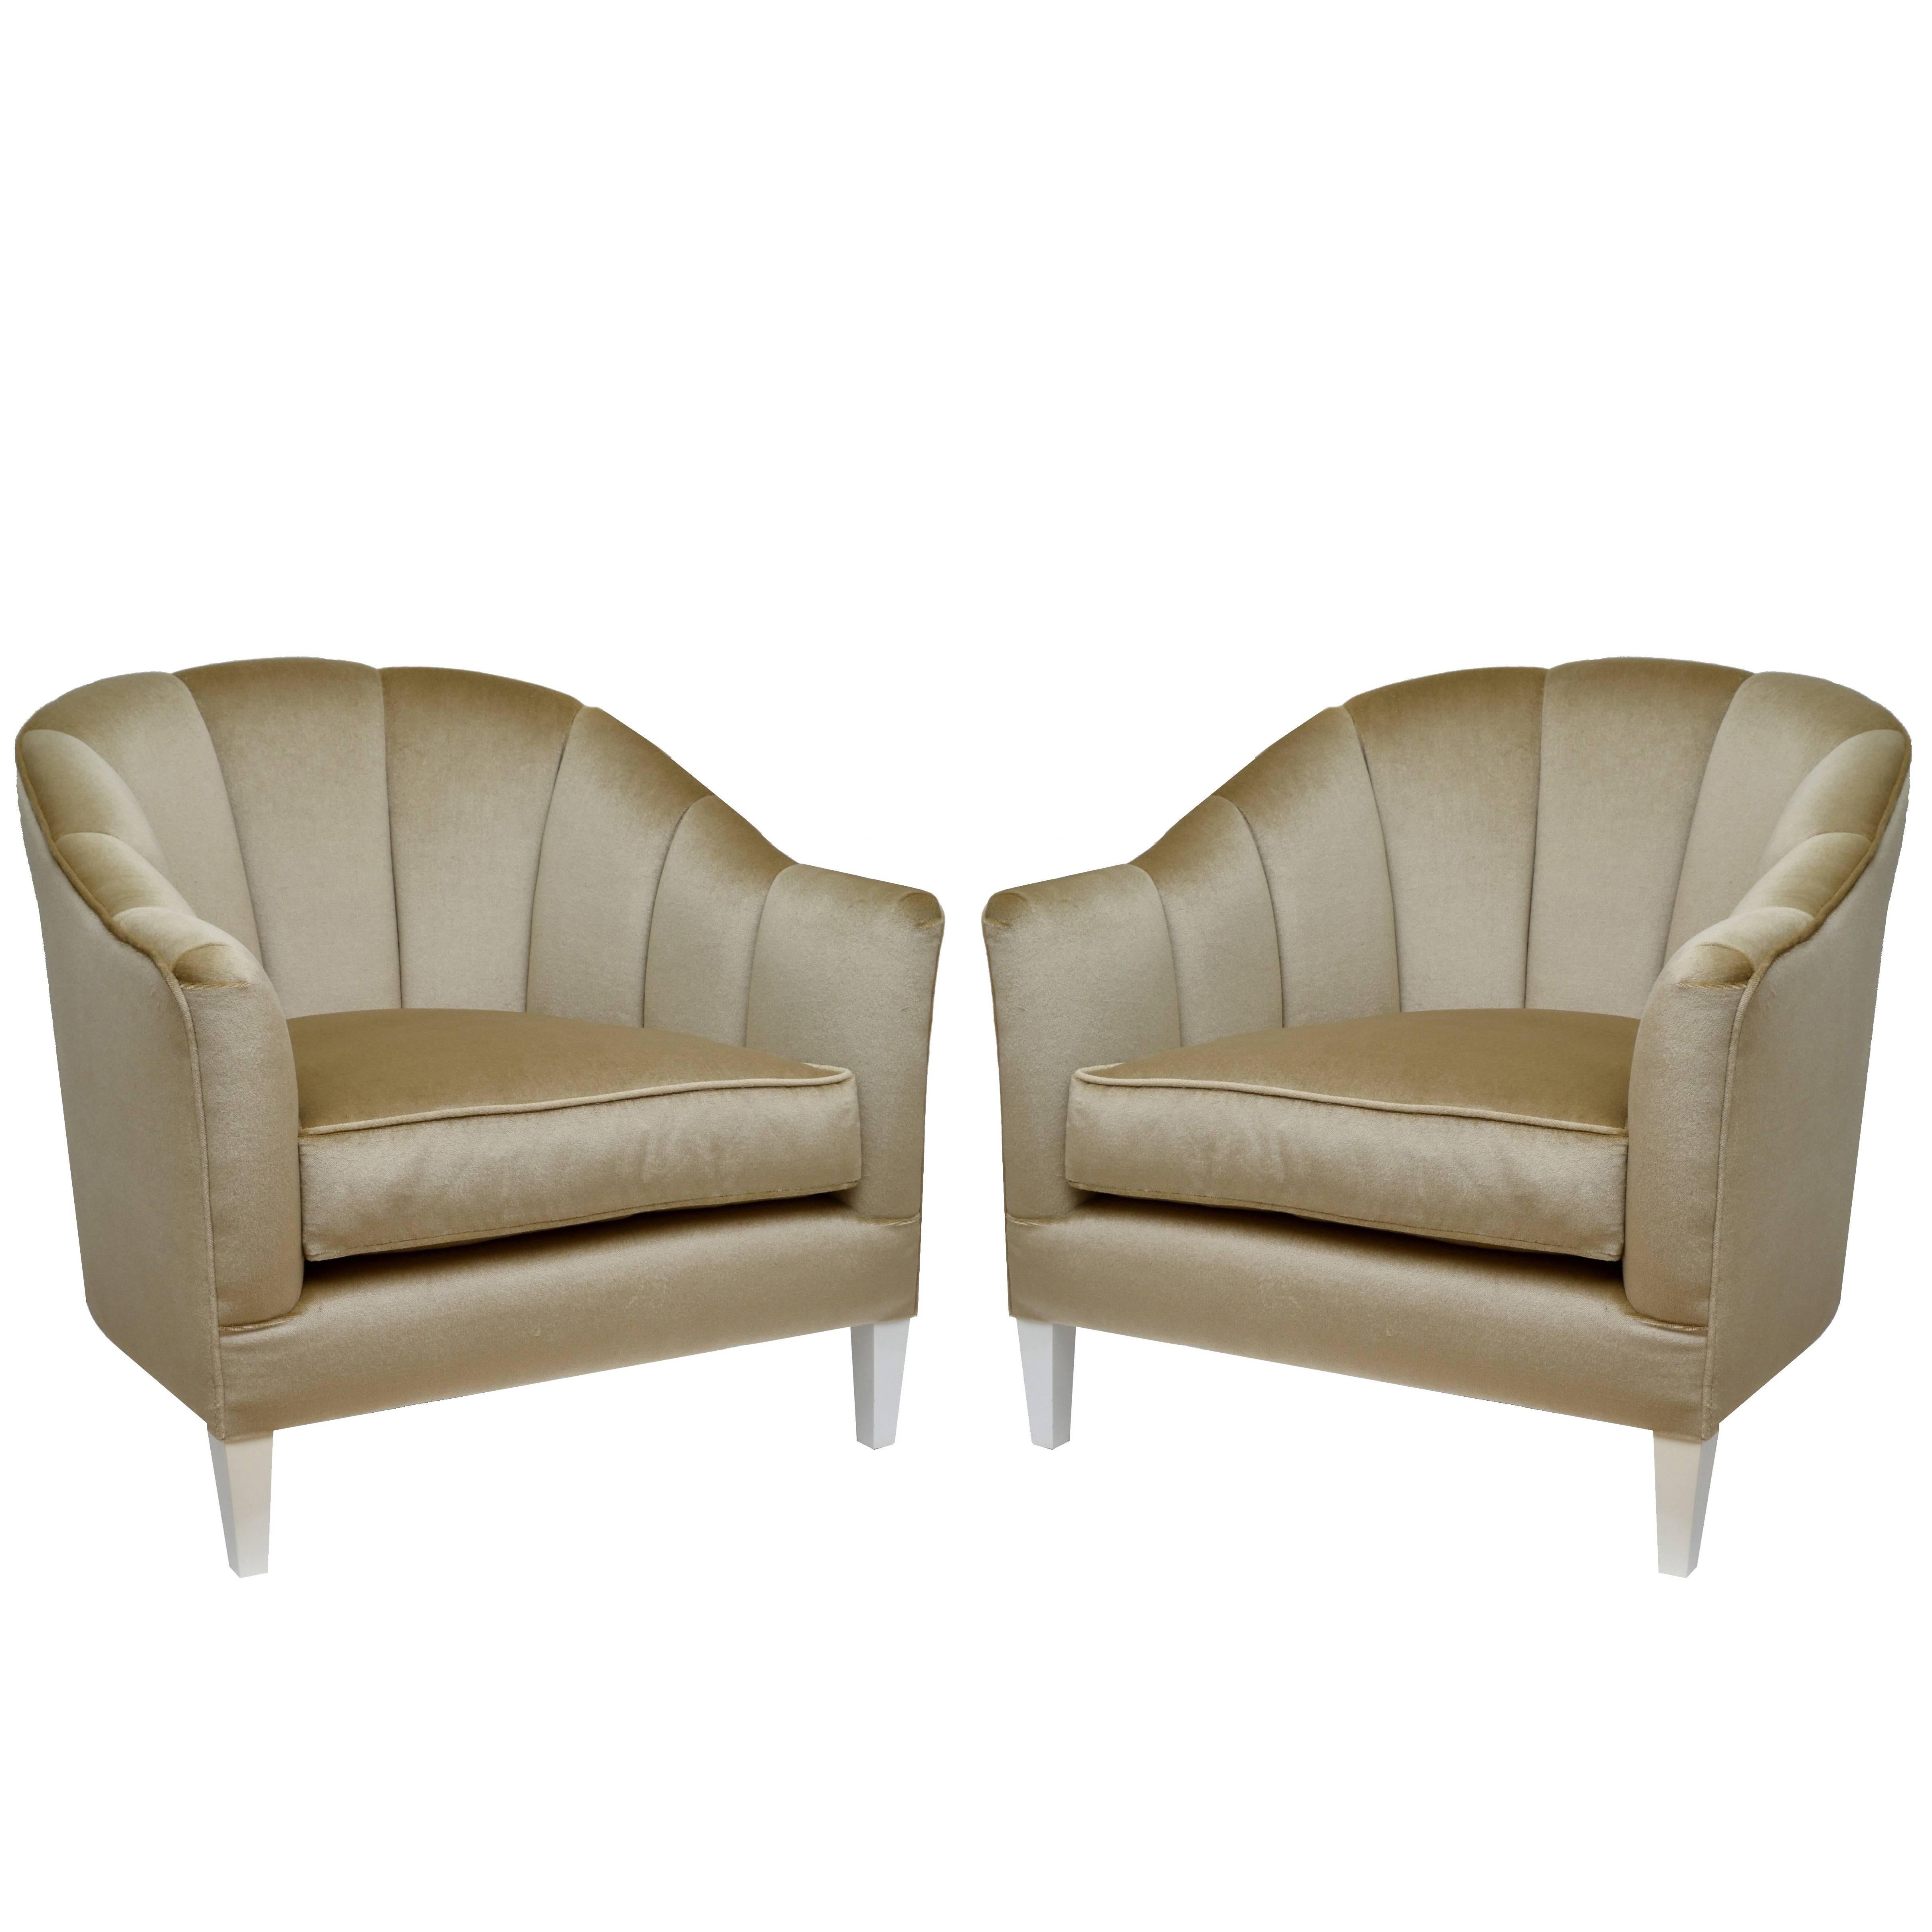 Pair of Contemporary Lounge Chairs in Mohair Scalloped Backrest